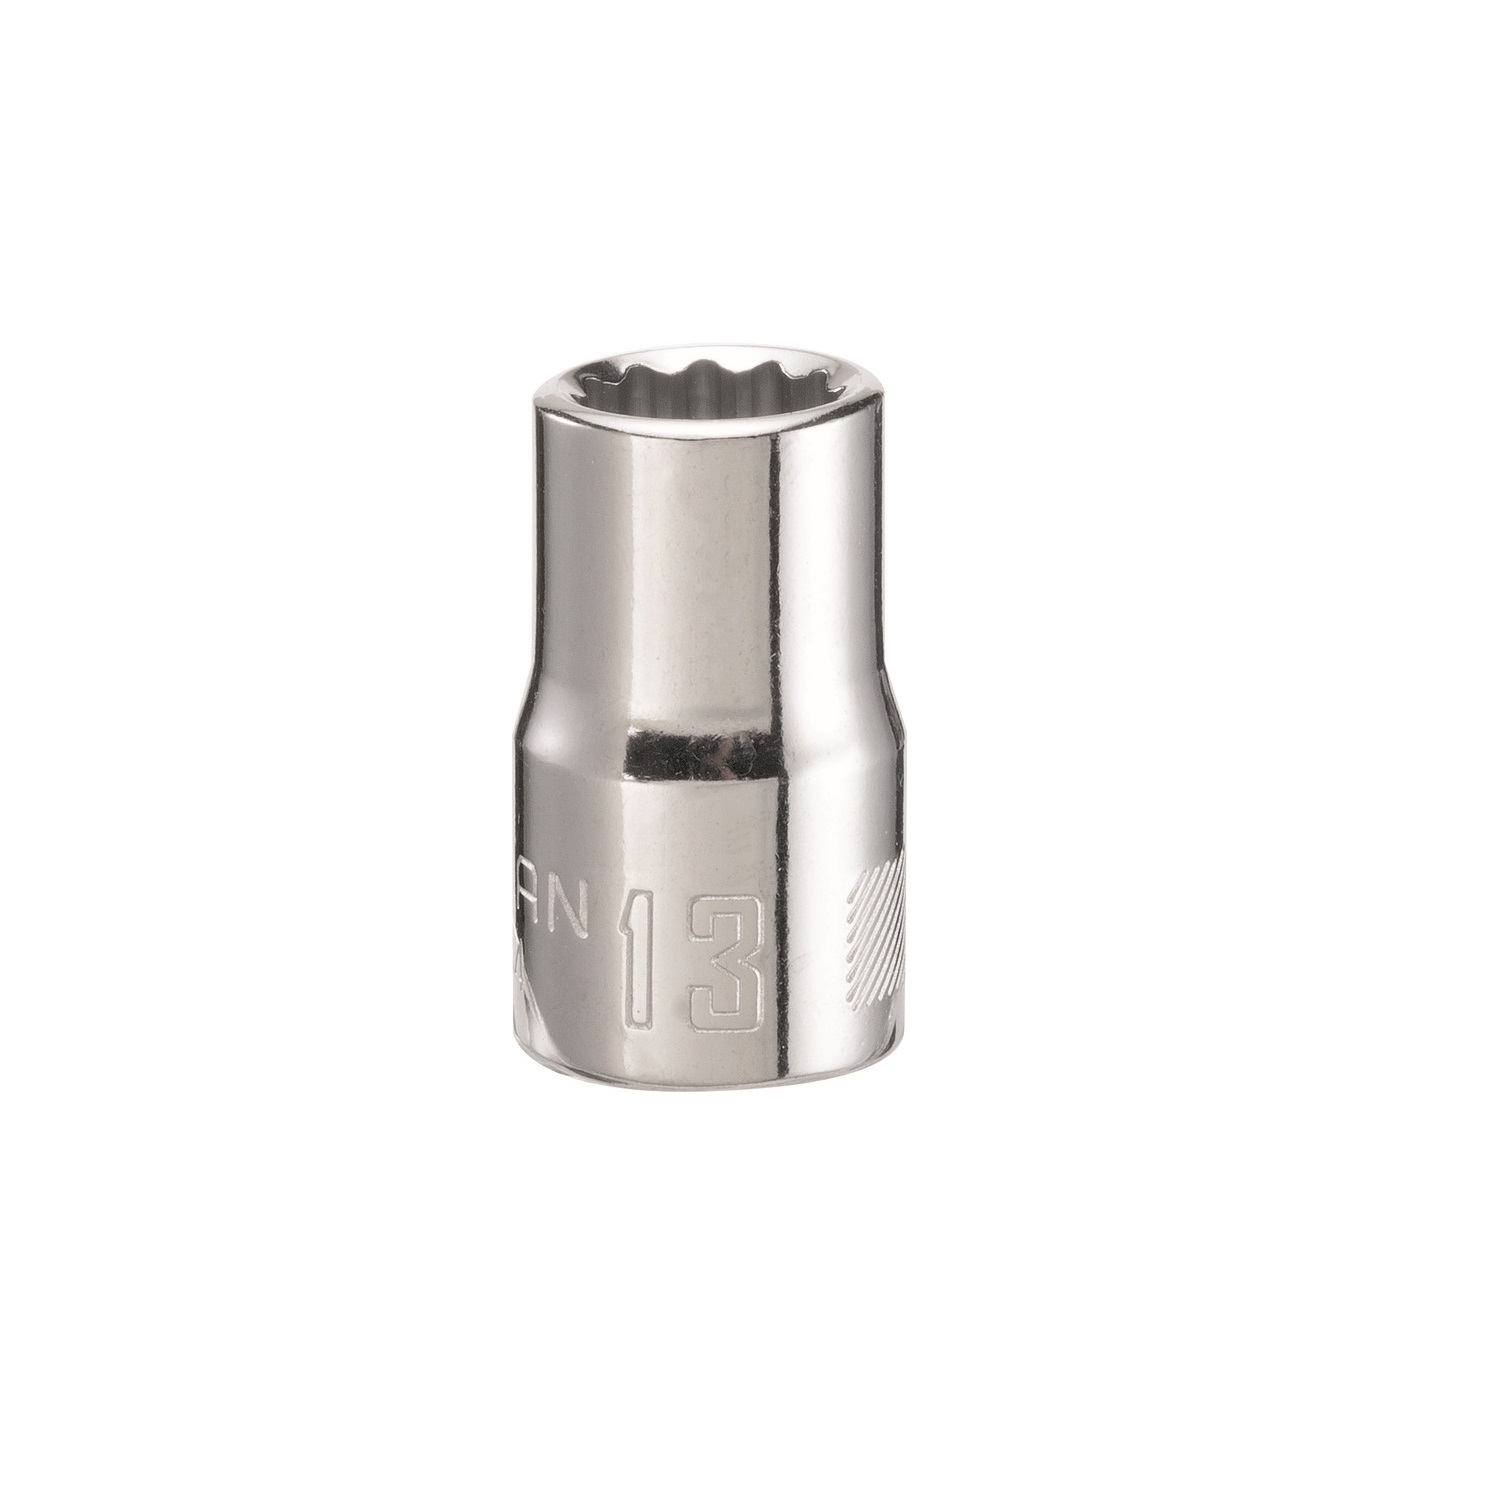 Craftsman 13 mm X 1/2 in. drive 12 Point Shallow Socket 1 pc